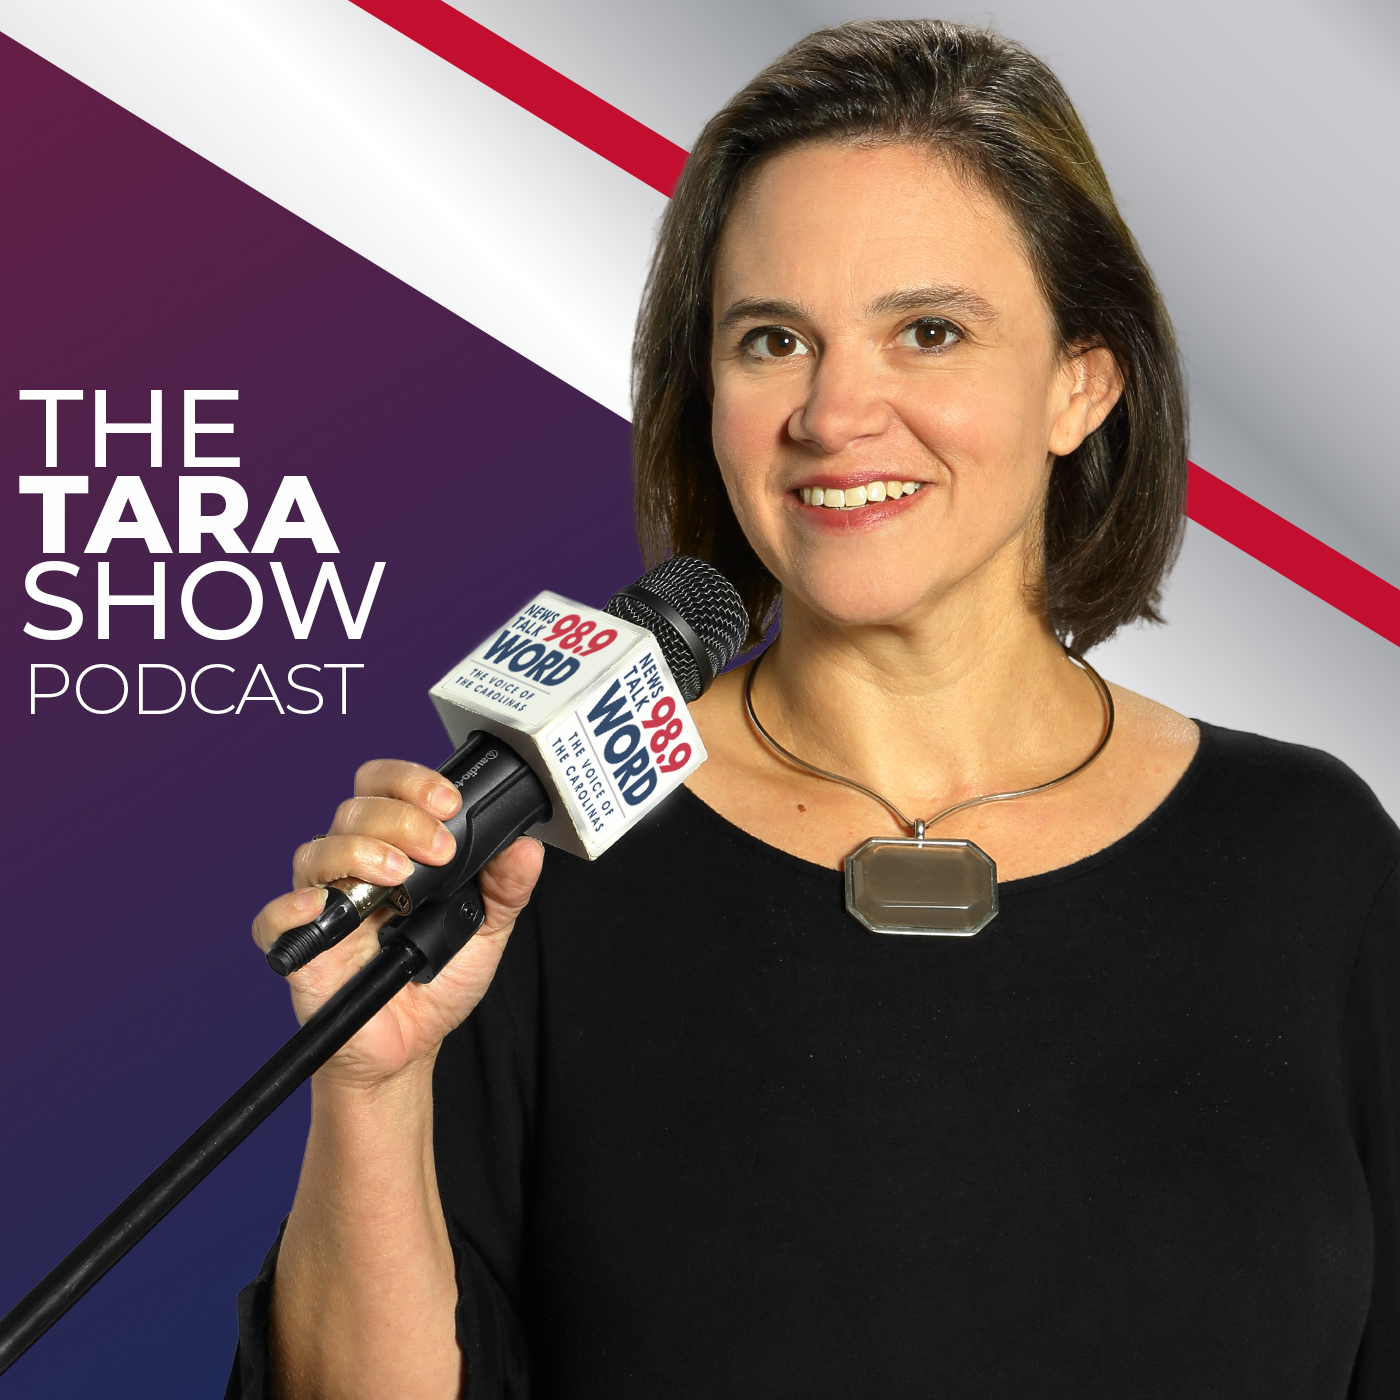 Hour 4: The Tara Show - “Marketing Voices with Ryan and Lee” “Education is Freedom with Ryan and Jim Keyes” “The Sound of Ryan's Voice” “Angel Cake” 